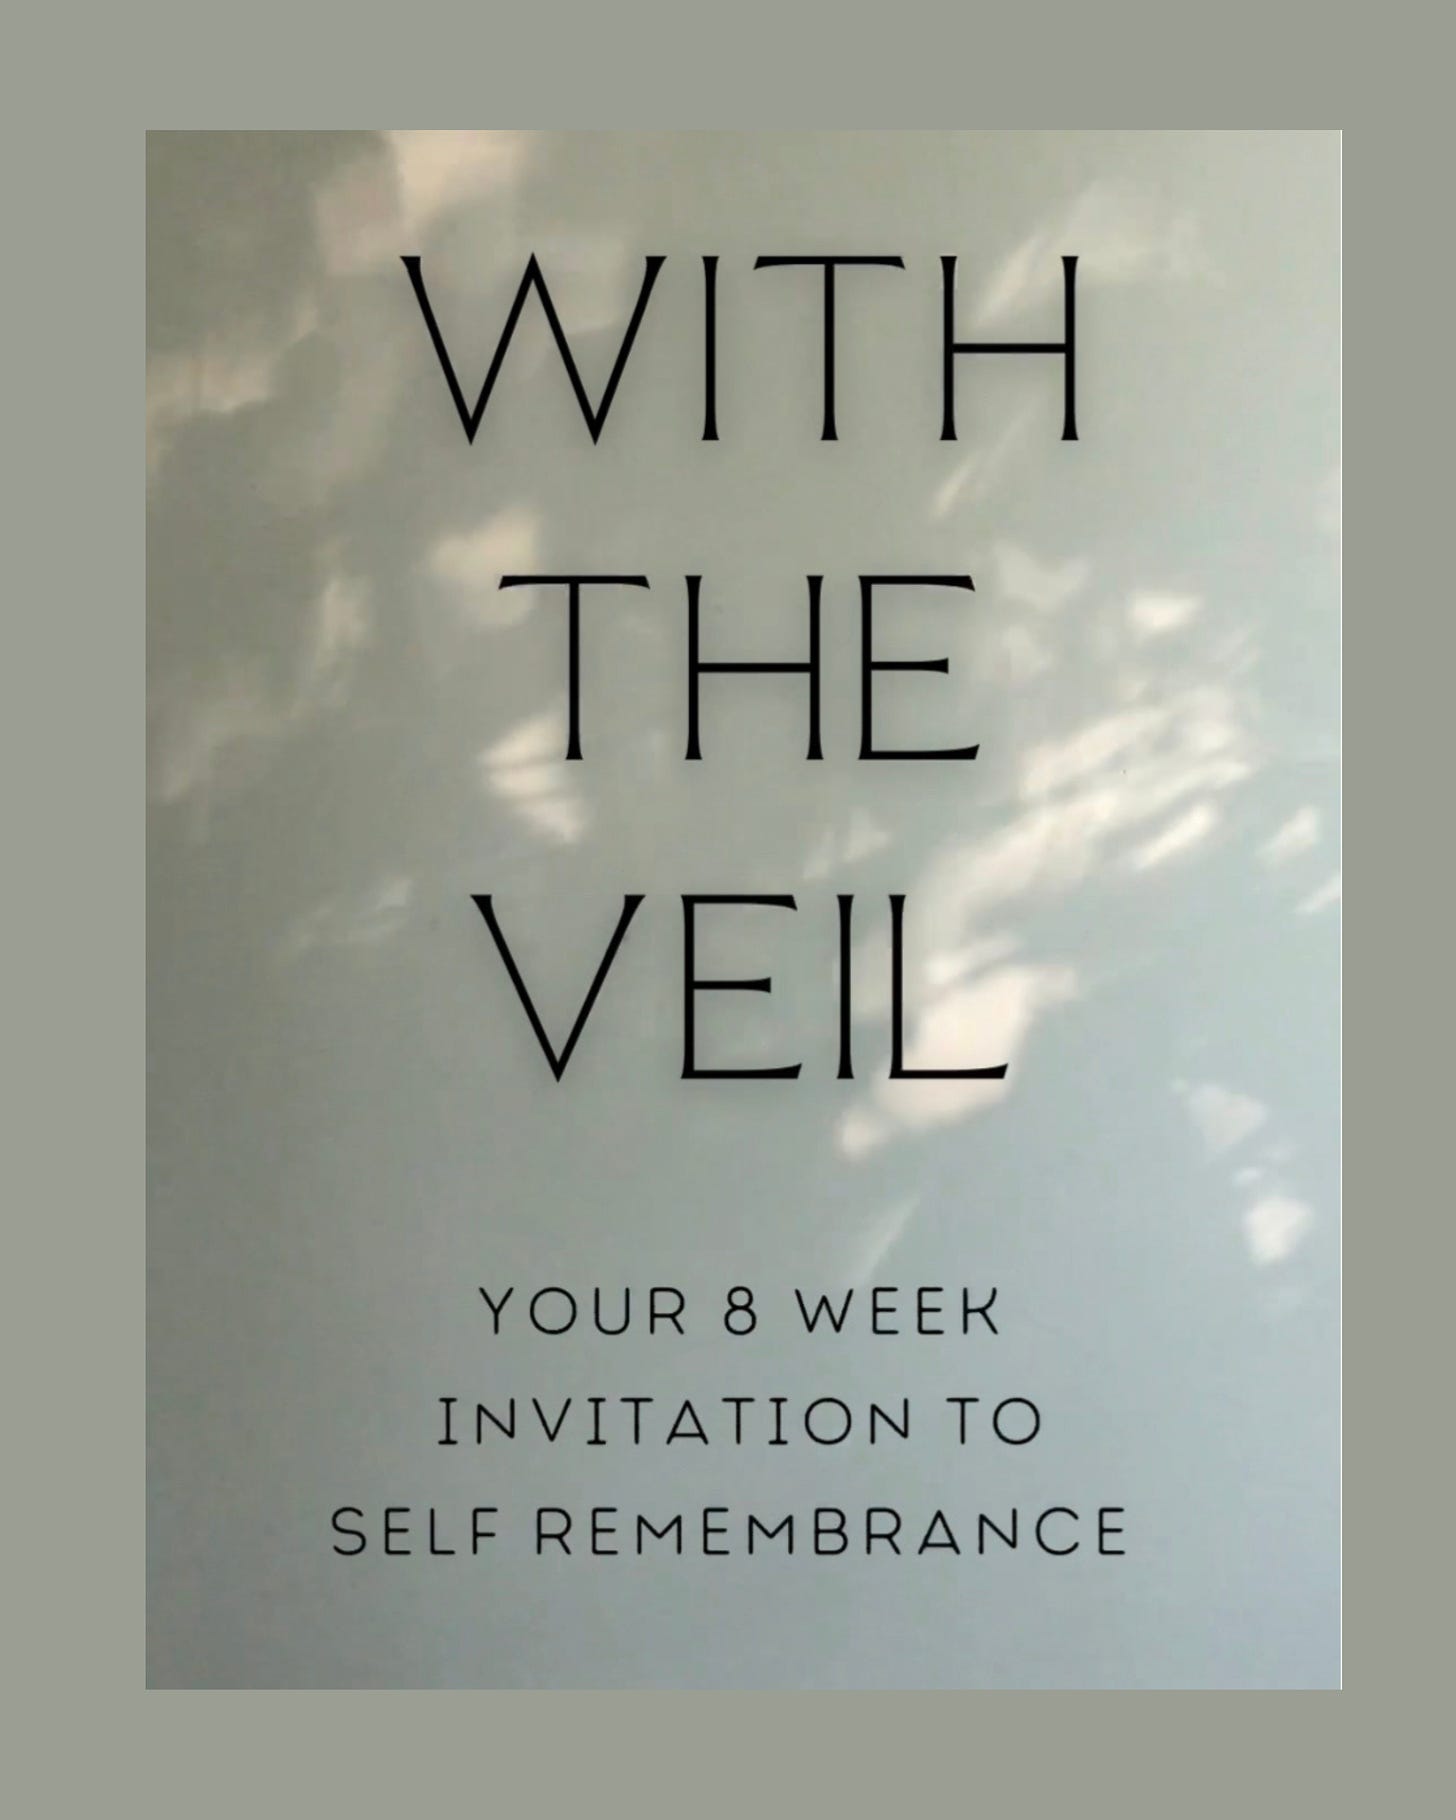 Image of shadows through the trees appearing on a white wall. Text on the image reads “WITH THE VEIL: YOUR 8 WEEK INVITATION TO SELF REMEMBRANCE”